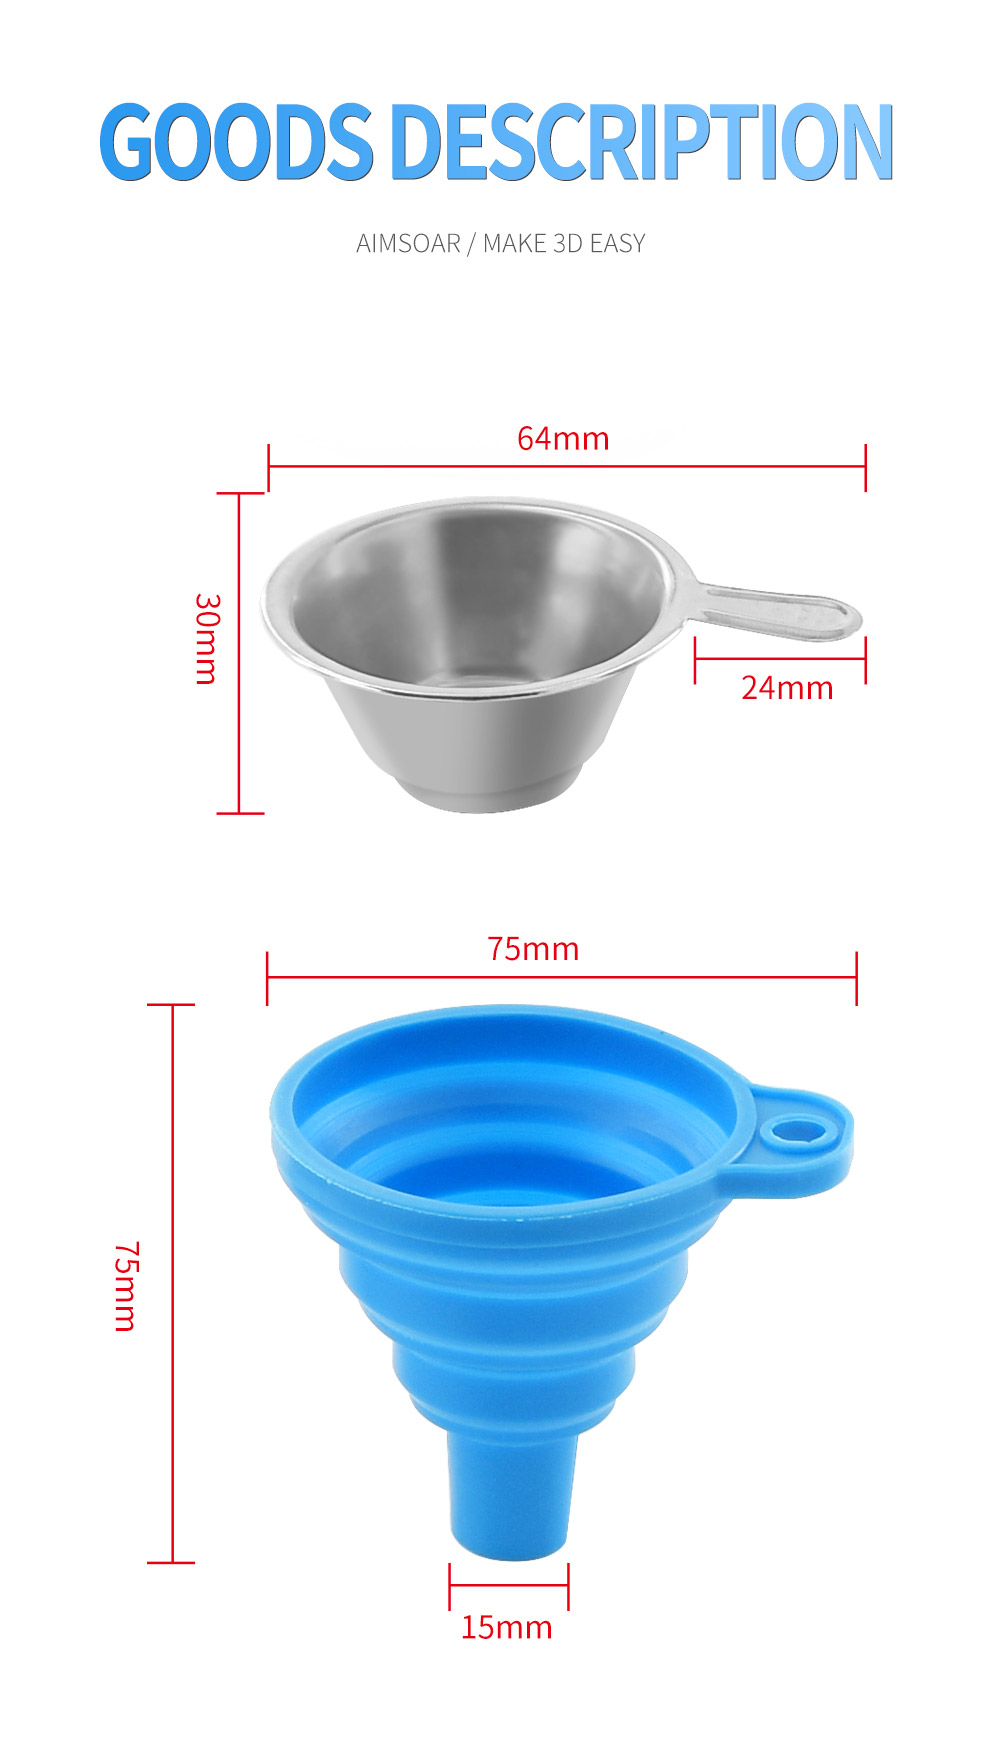 TWO-TREESreg-Collapsible-Silicone-Funnels-and-Stainless-Steel-Resin-Filter-Cups-for-Pouring-Resin-Ba-1875450-2